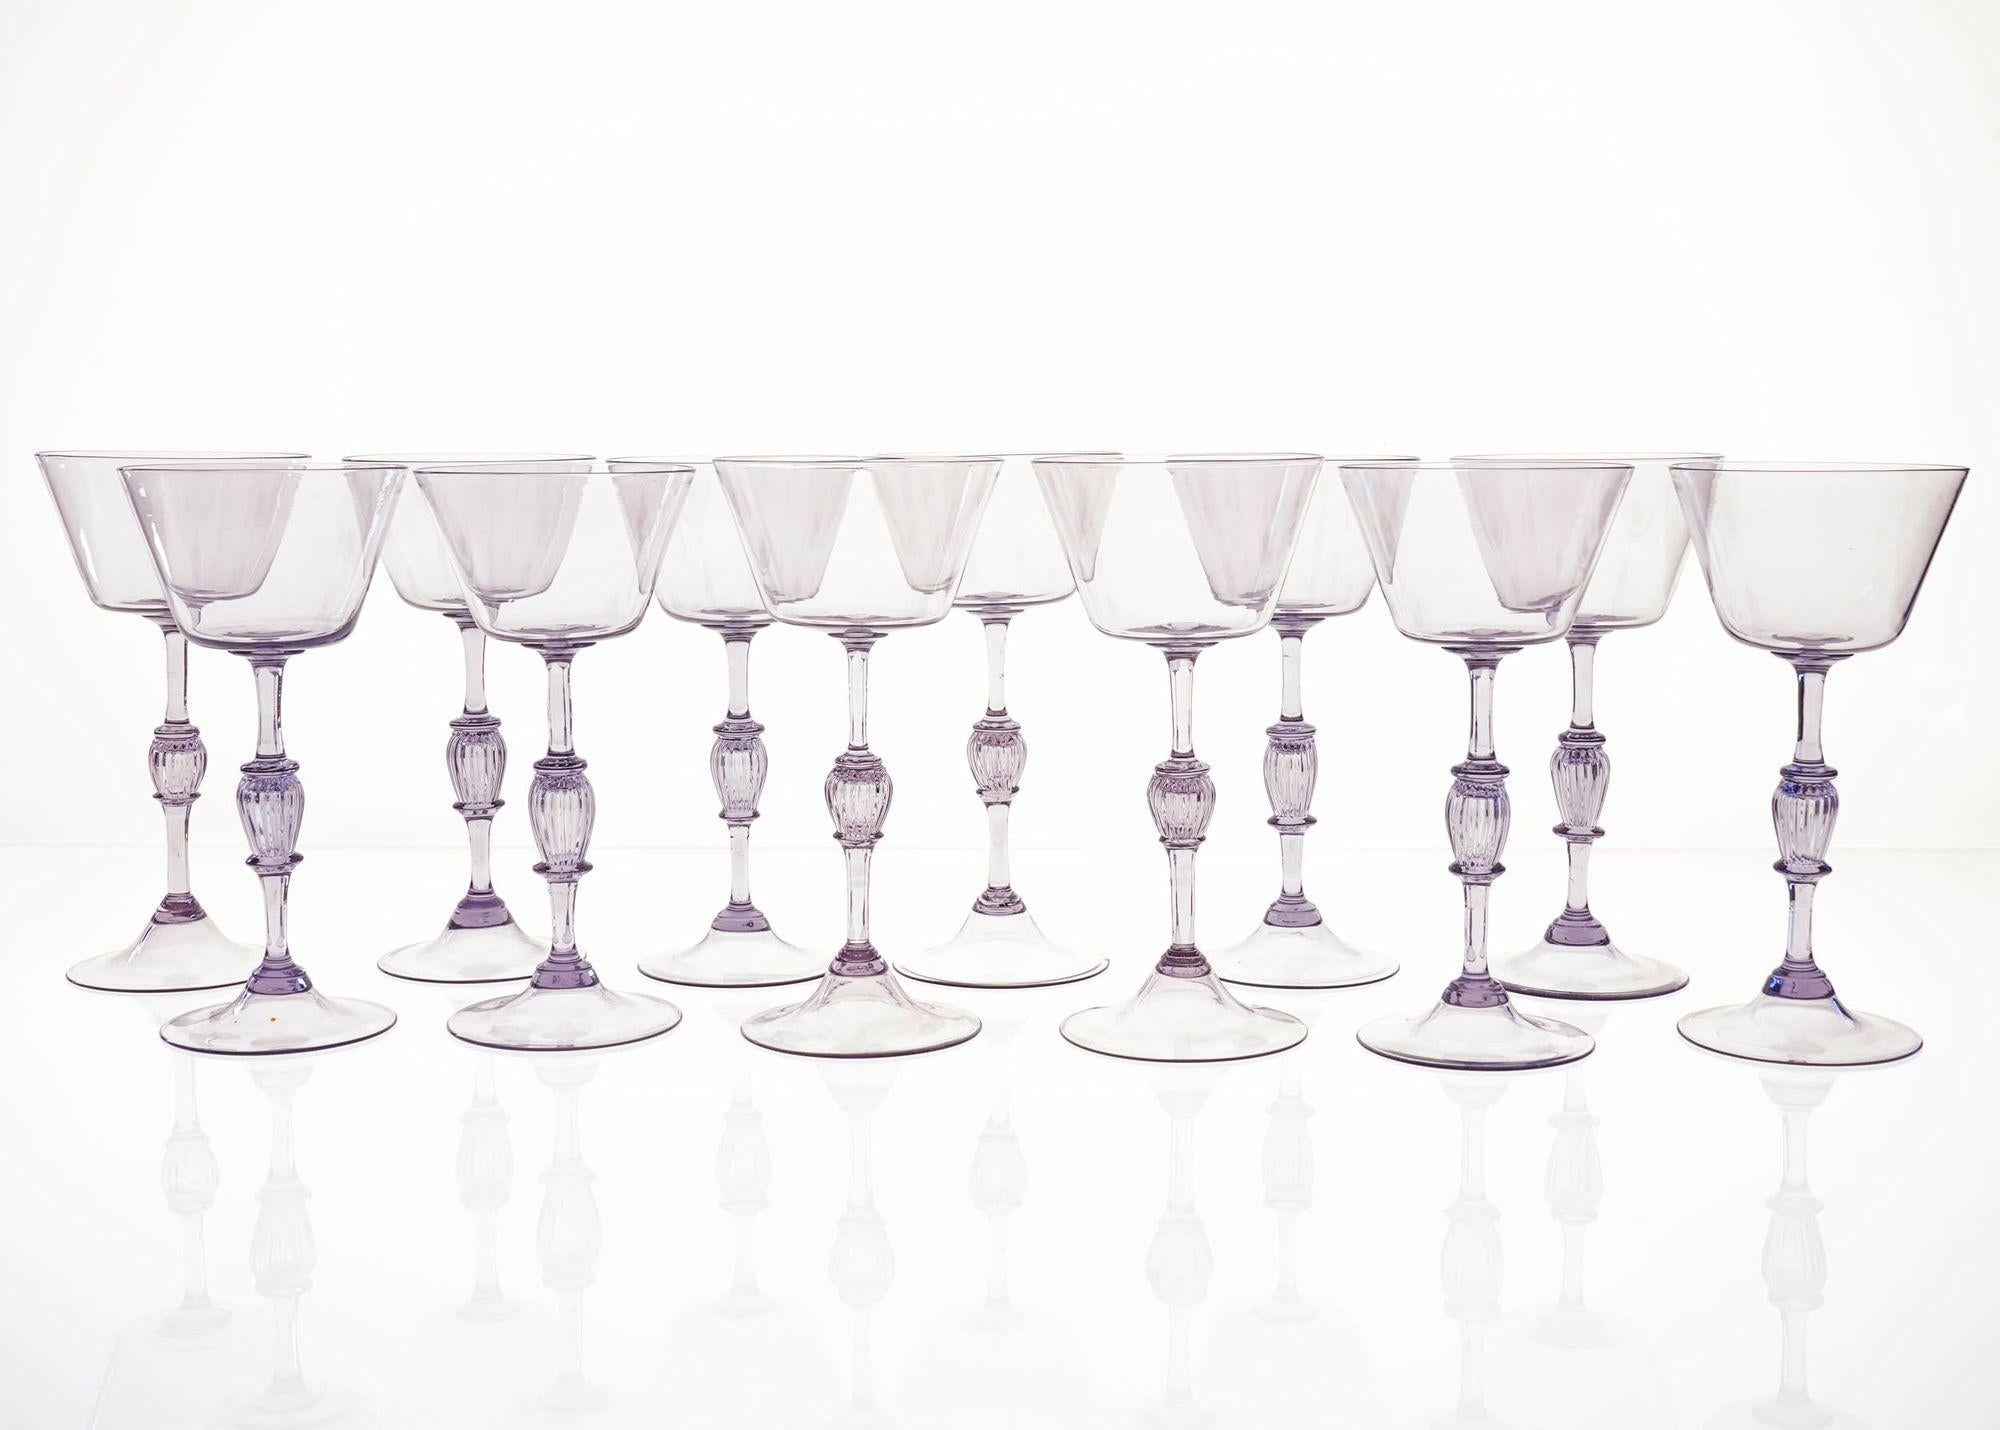 Introducing an Unique and Rare Set of 12 Cyclamen Glass Flutes.
Made in Murano on the 50ties by Cenedese. Almost impossible to find a full 12 pieces set.
This full set of 12 cyclamen glass flutes is a must-have for any collector of vintage glass or